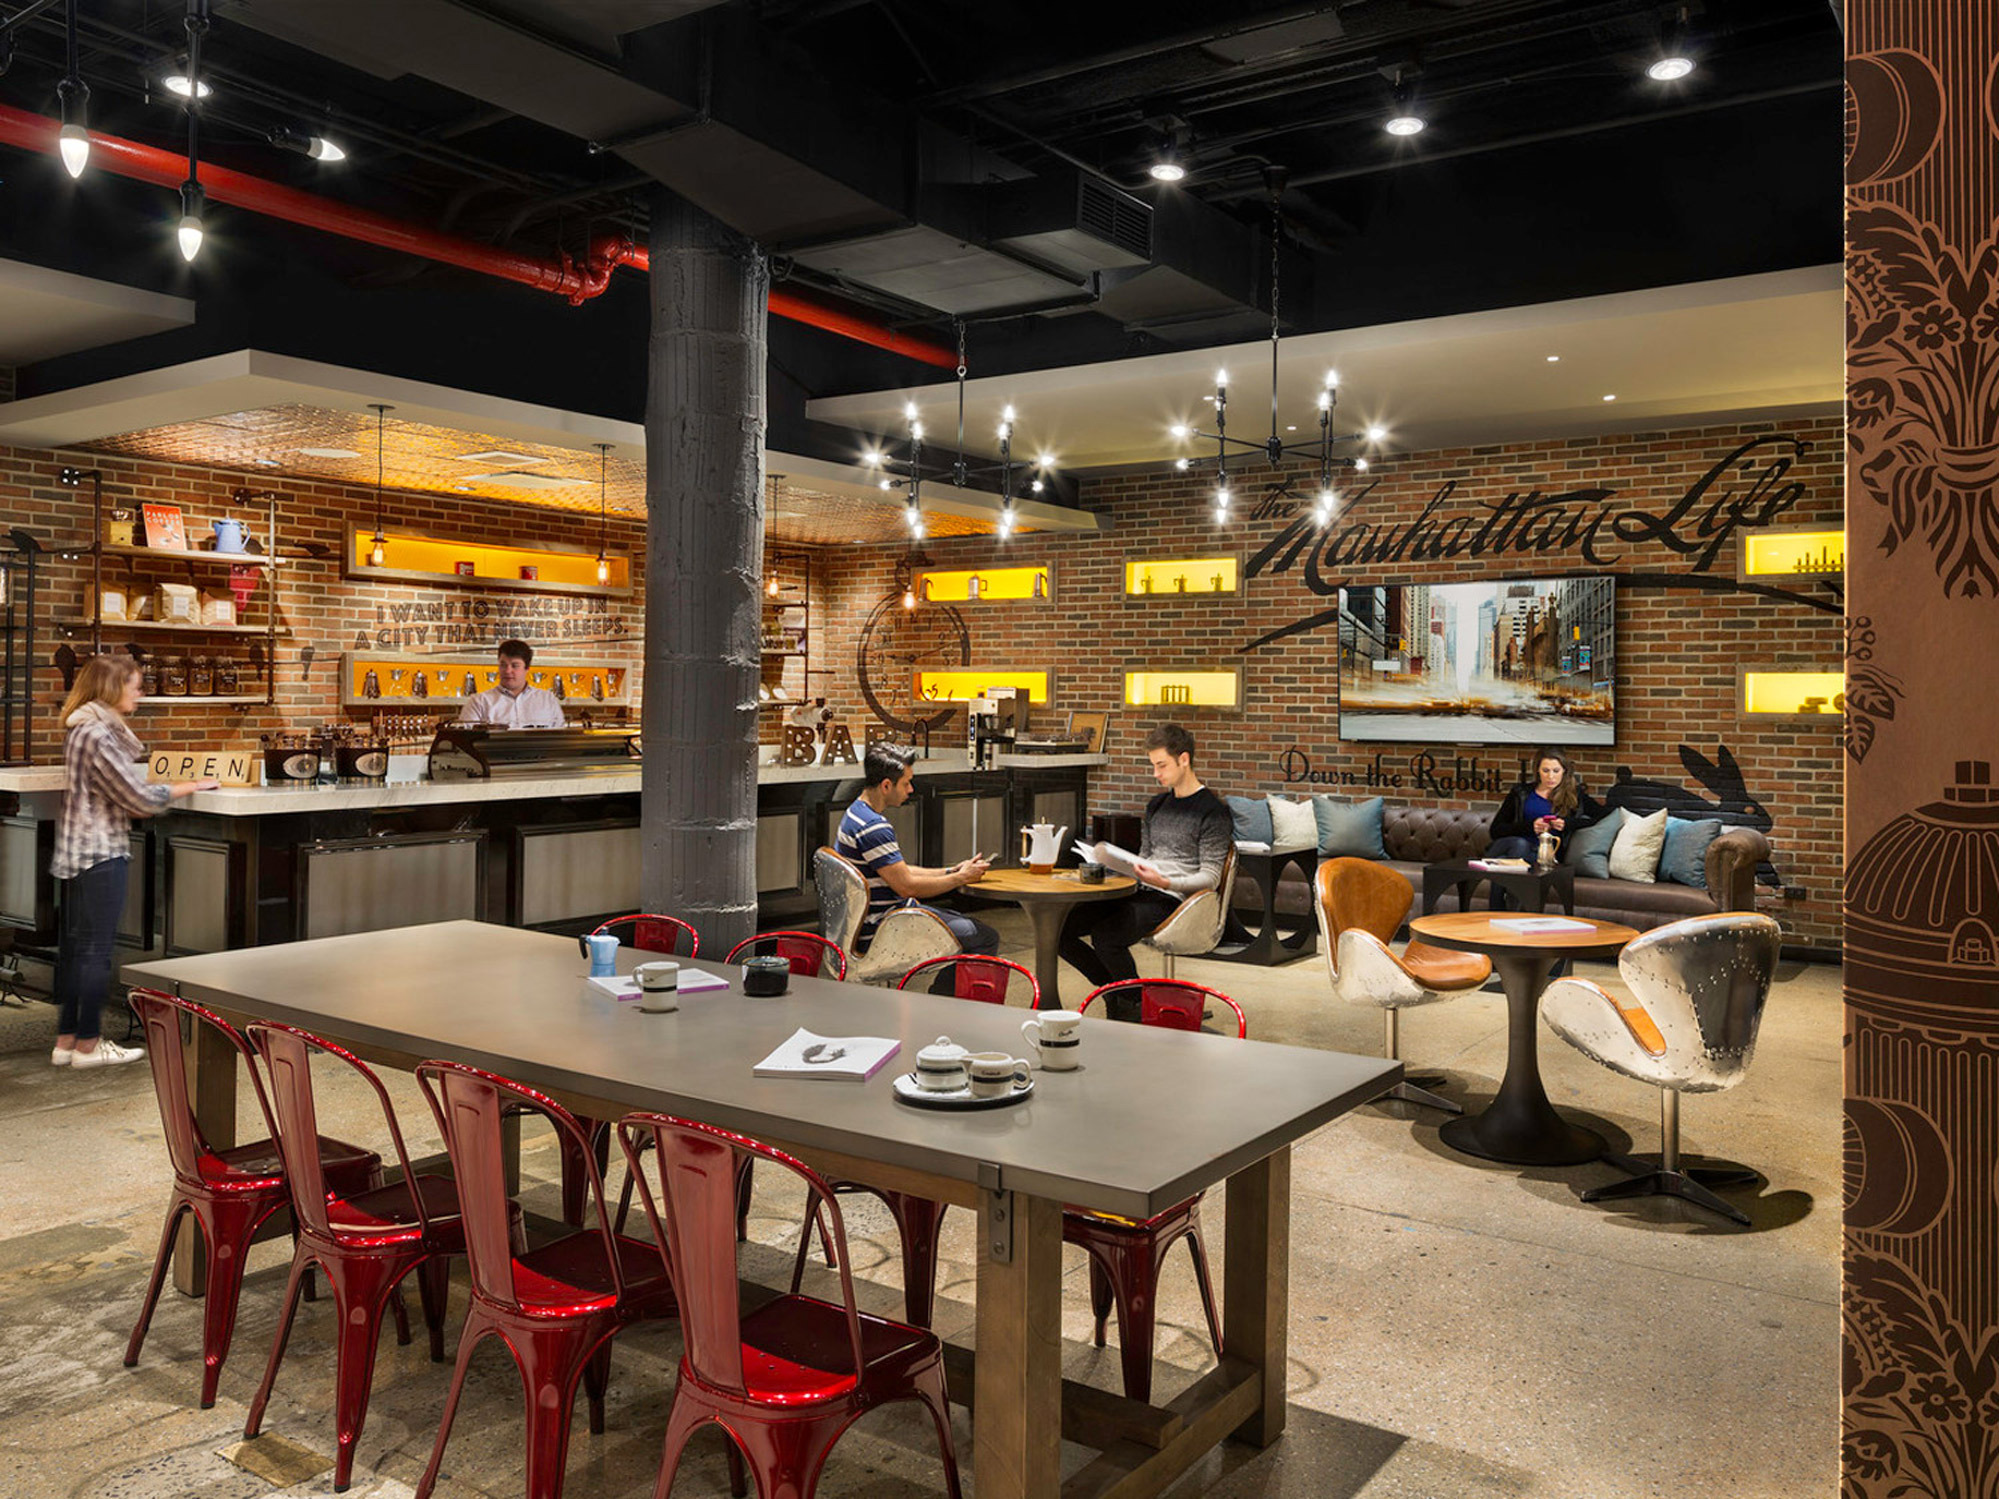 Modern eclectic cafe interior with industrial exposed ceiling and red accents. Mix of communal and private seating options, highlighted by warm pendant lighting above a polished concrete floor. Graphic wall treatments add a vibrant contrast to the urban aesthetic.